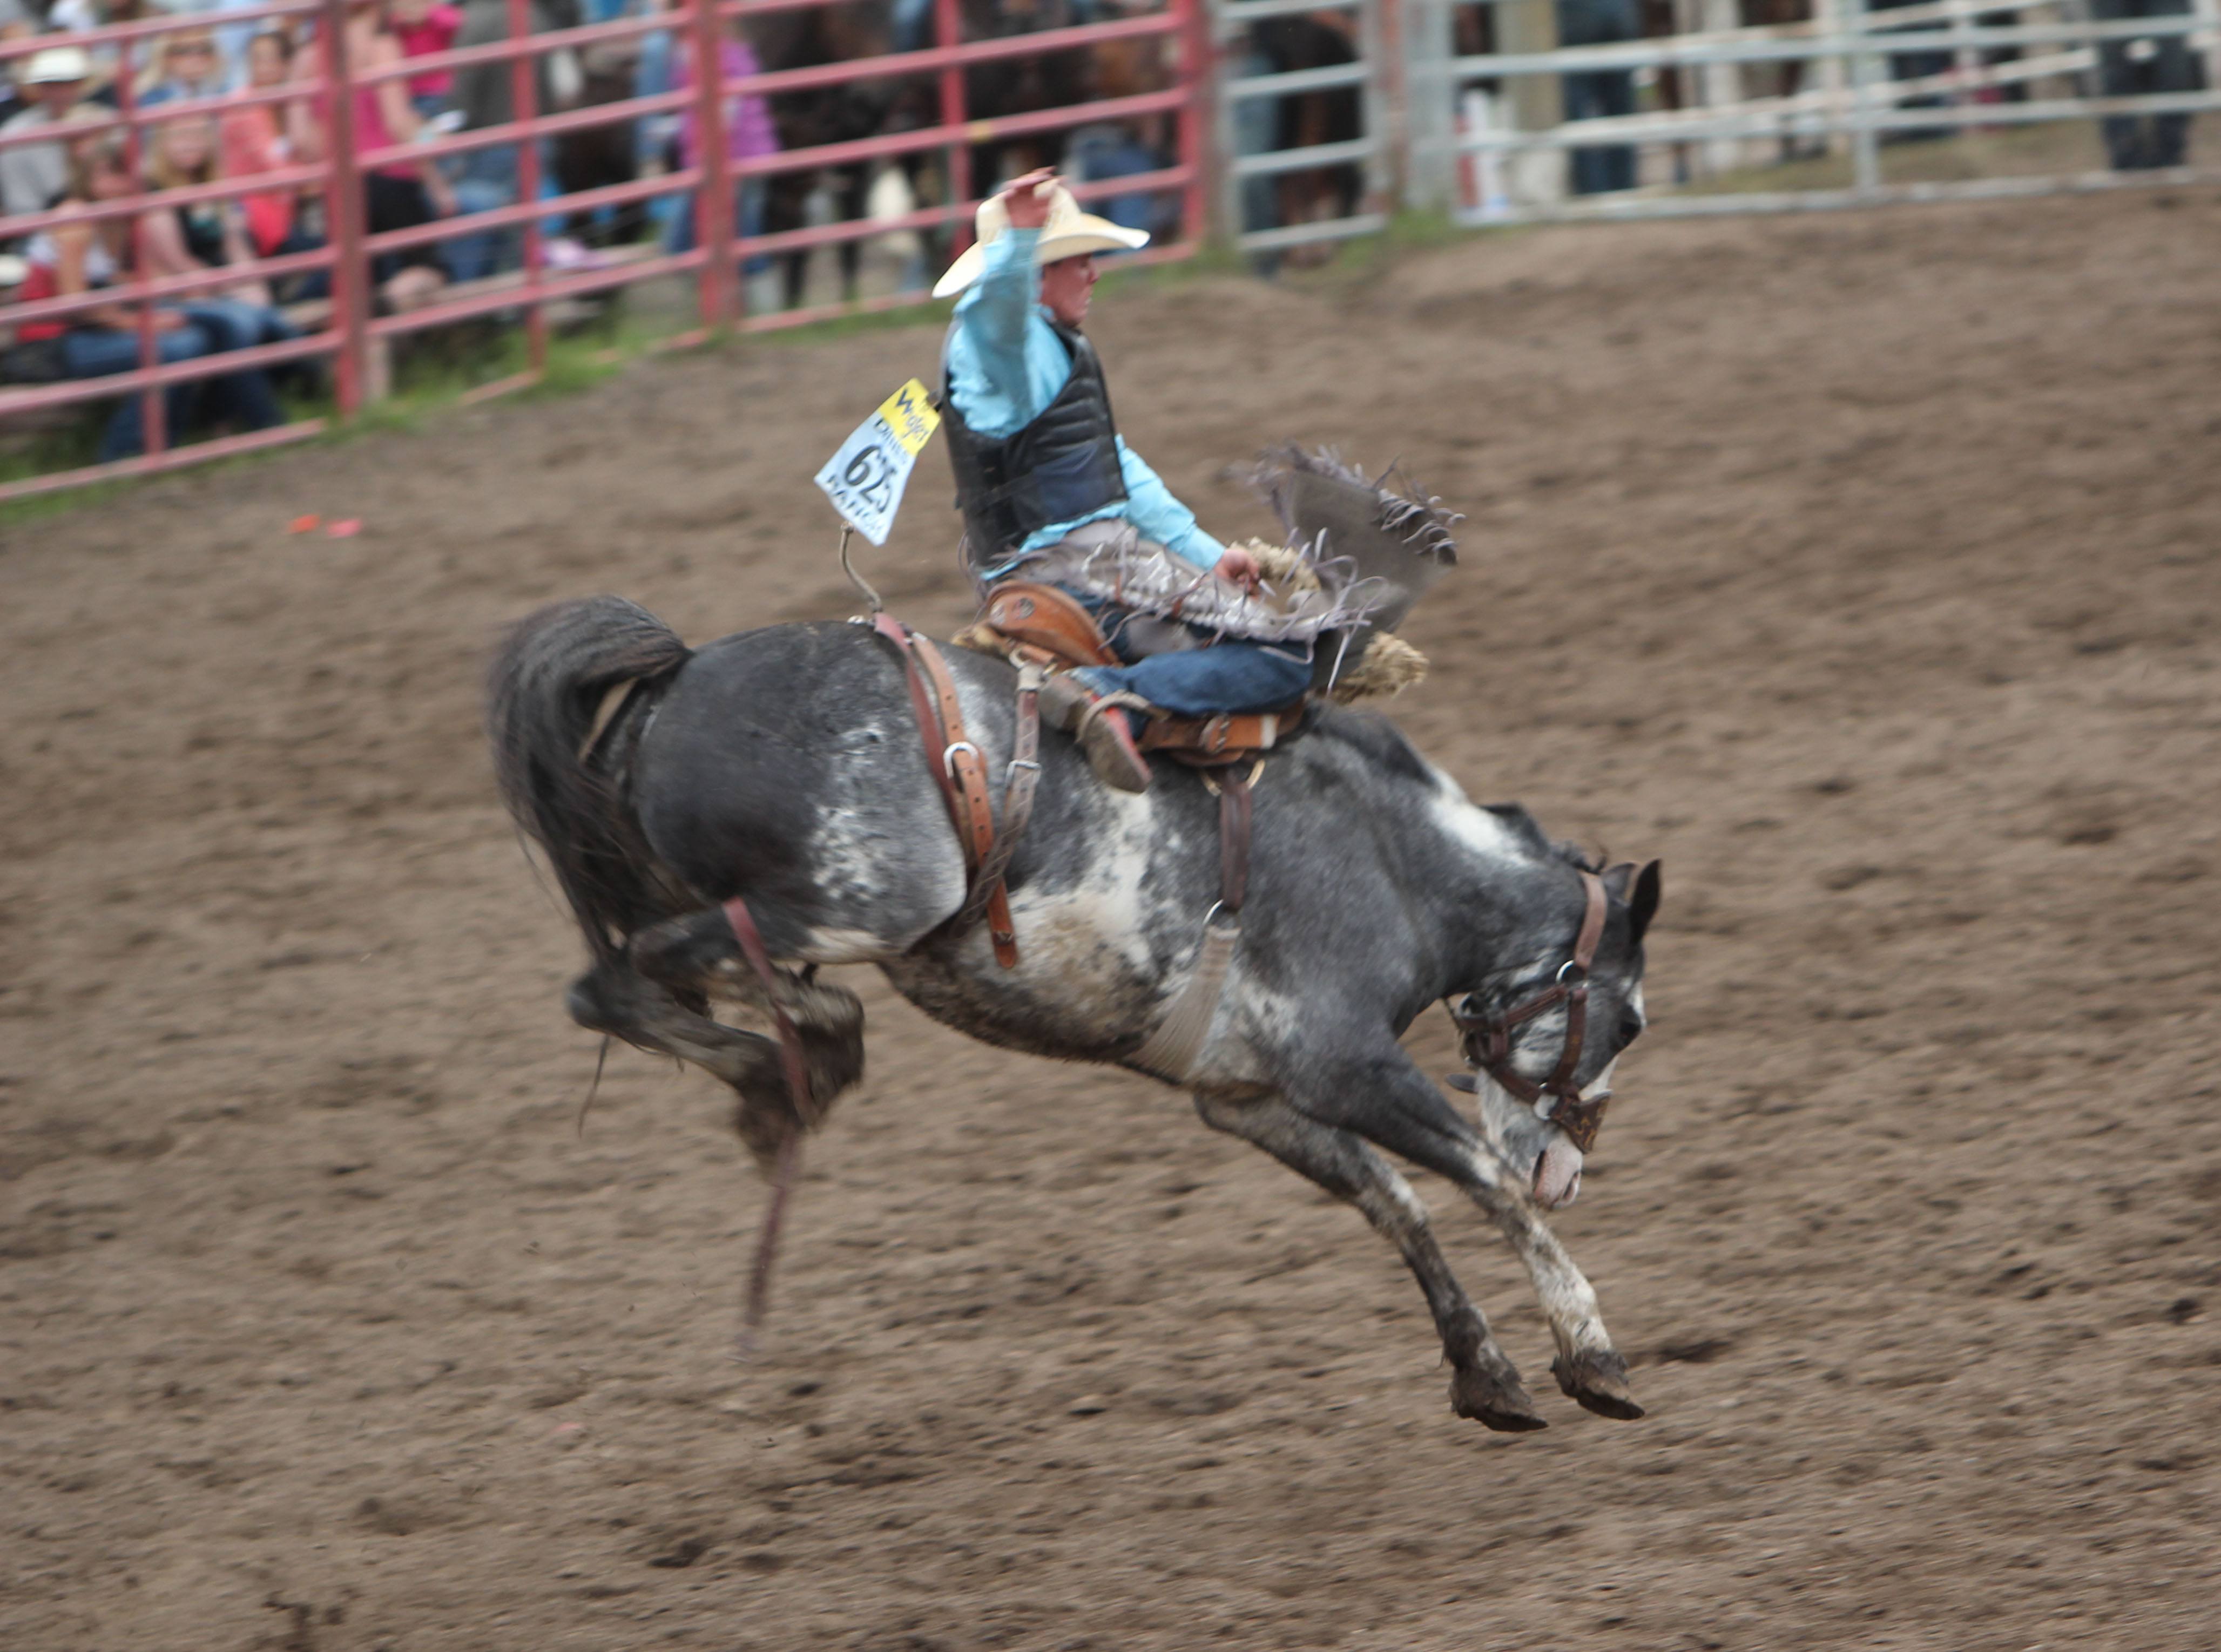 RIDE 'EM - Chad Thomson from Black Diamond participated in the saddle bronc category at this year's Daines Ranch Pro Rodeo which was held last weekend.